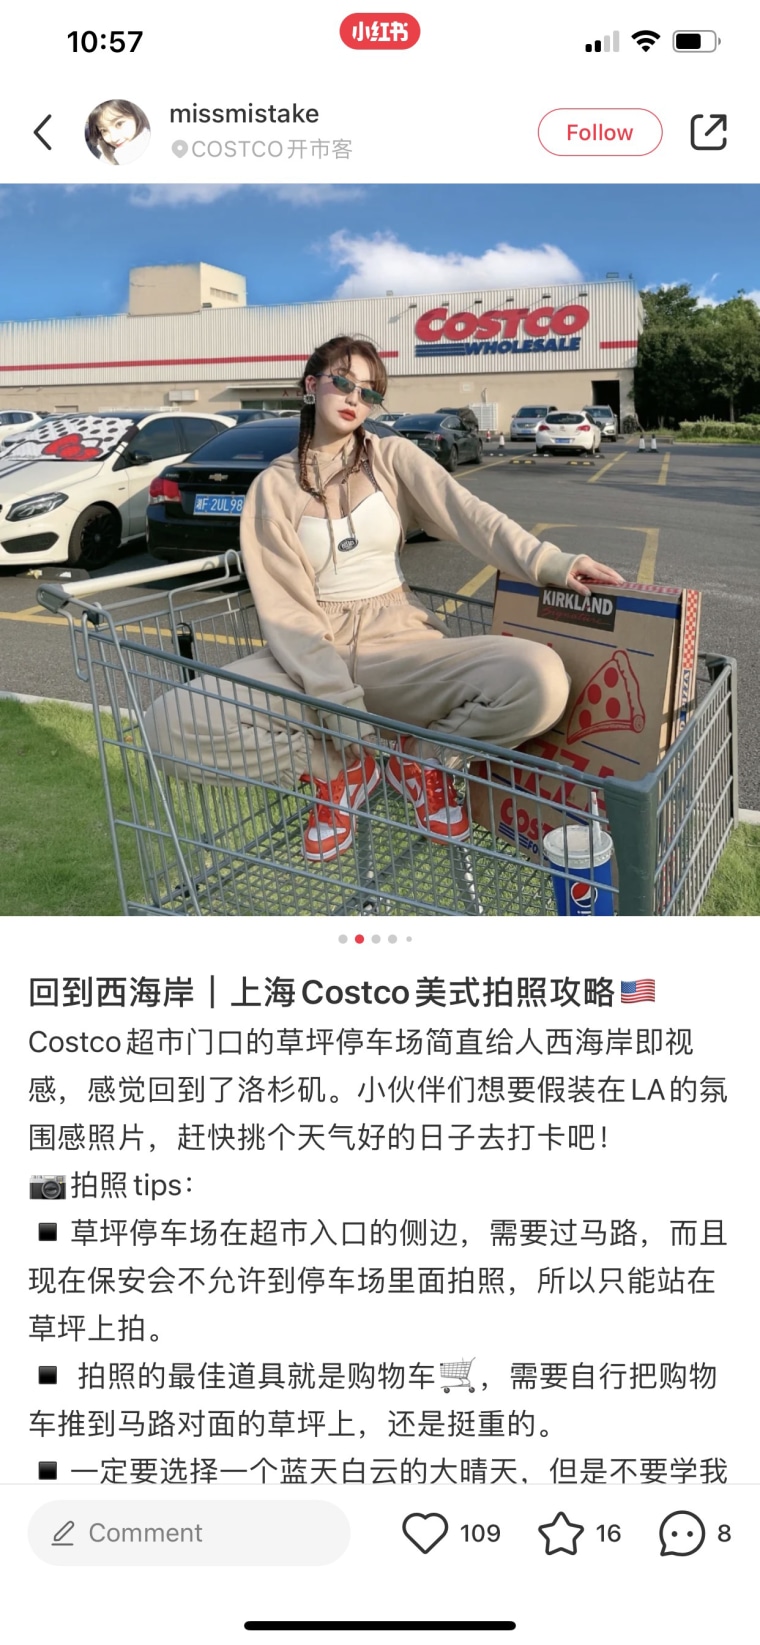 "The parking lot lawn by Costco's entrance really gives people a sense of the West Coast, like you're back in Los Angeles. Friends, if you want to pretend like you're in Los Angeles, pick a day with good weather and check it out!" some of this caption read.